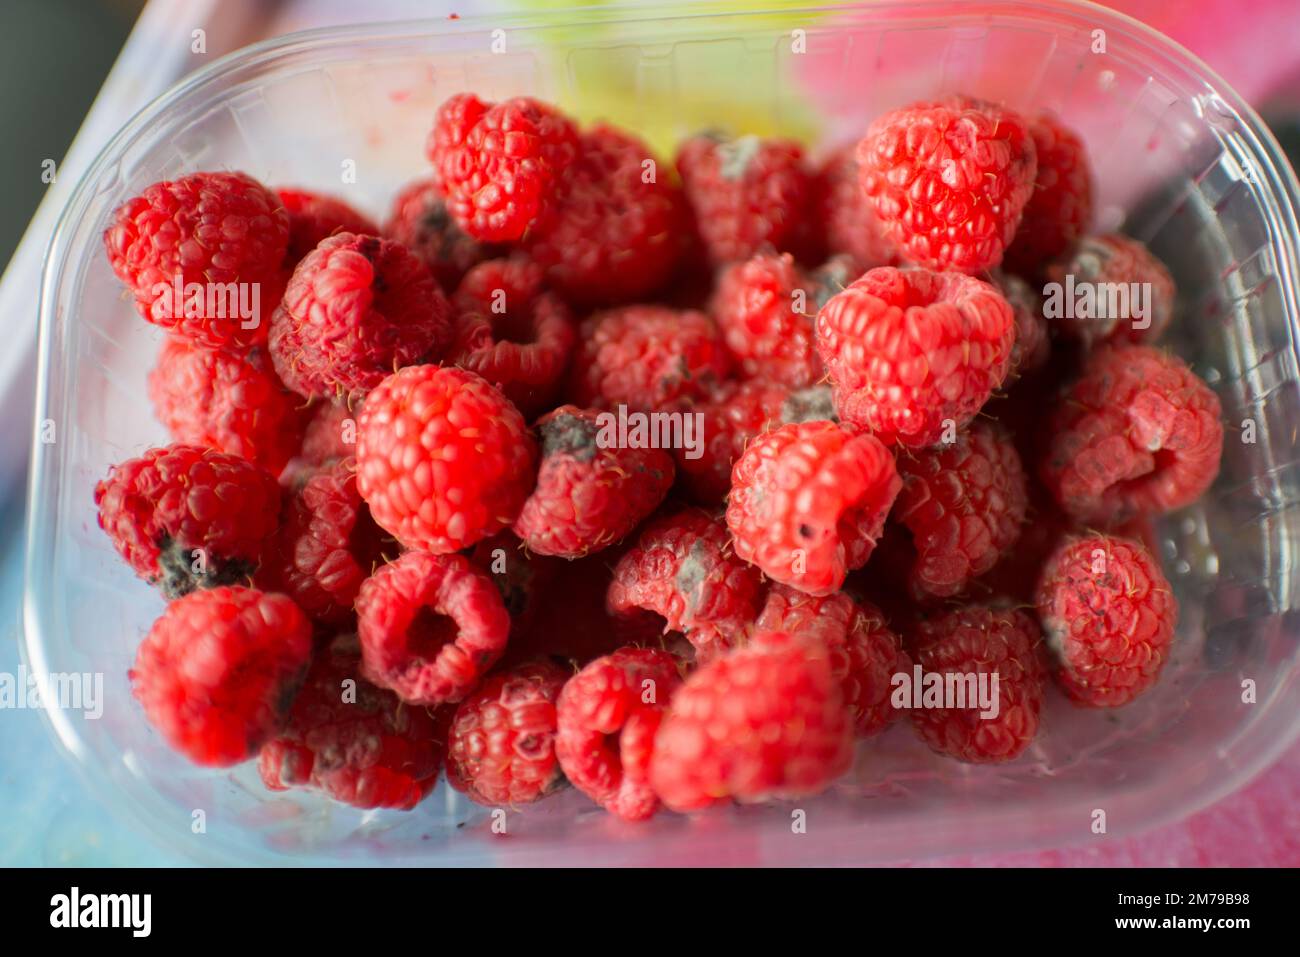 Plastic recipient with raspberries in bad condition, Bright red color Stock Photo